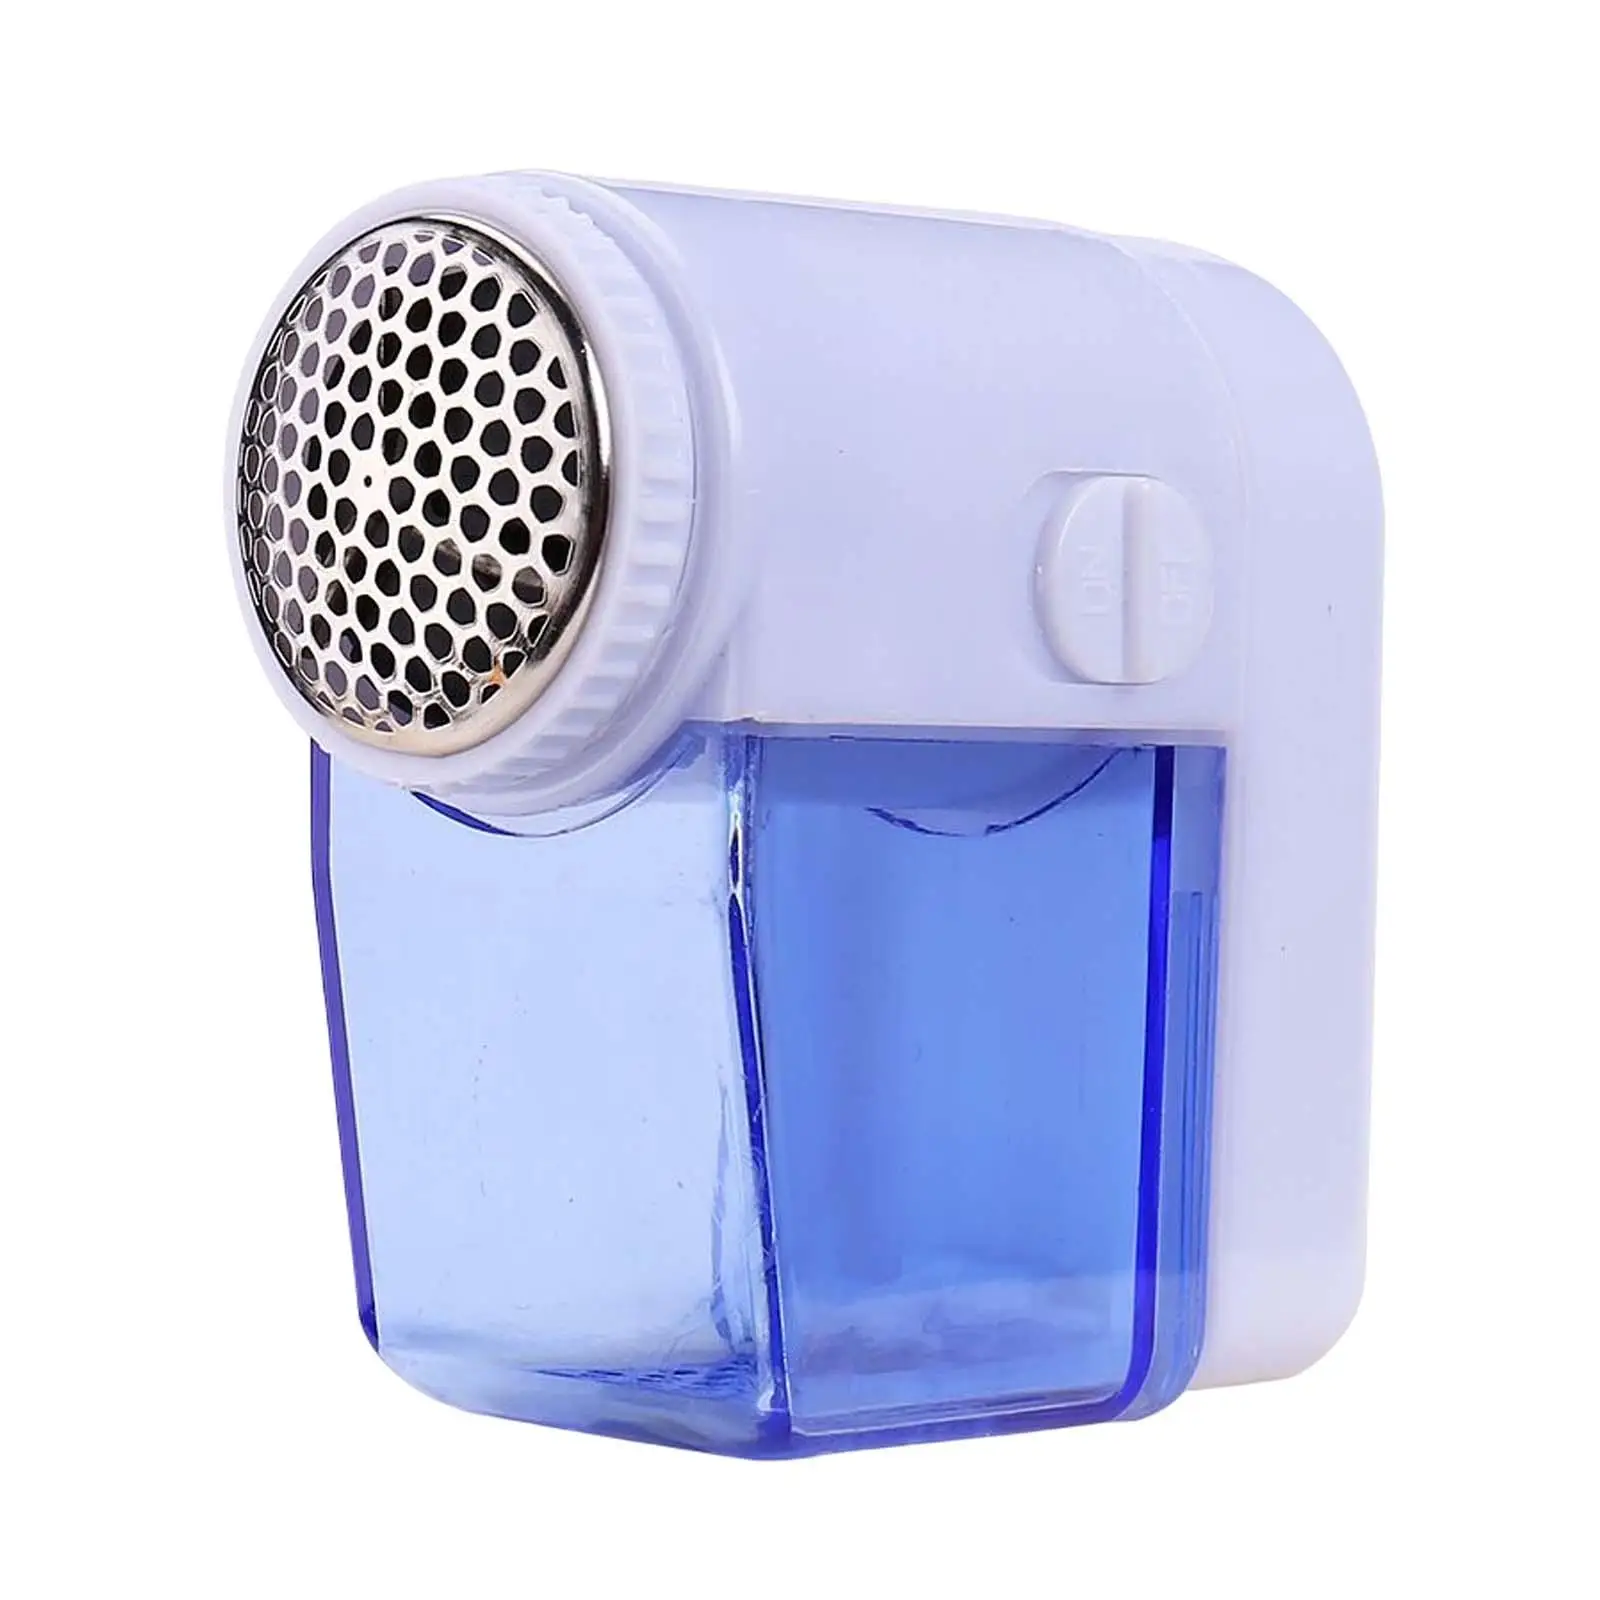 Electric Remover Honeycomb Net Remover Shaver Cut Machine Defuzzer for Bedding Clothes Wool Sweater Couch